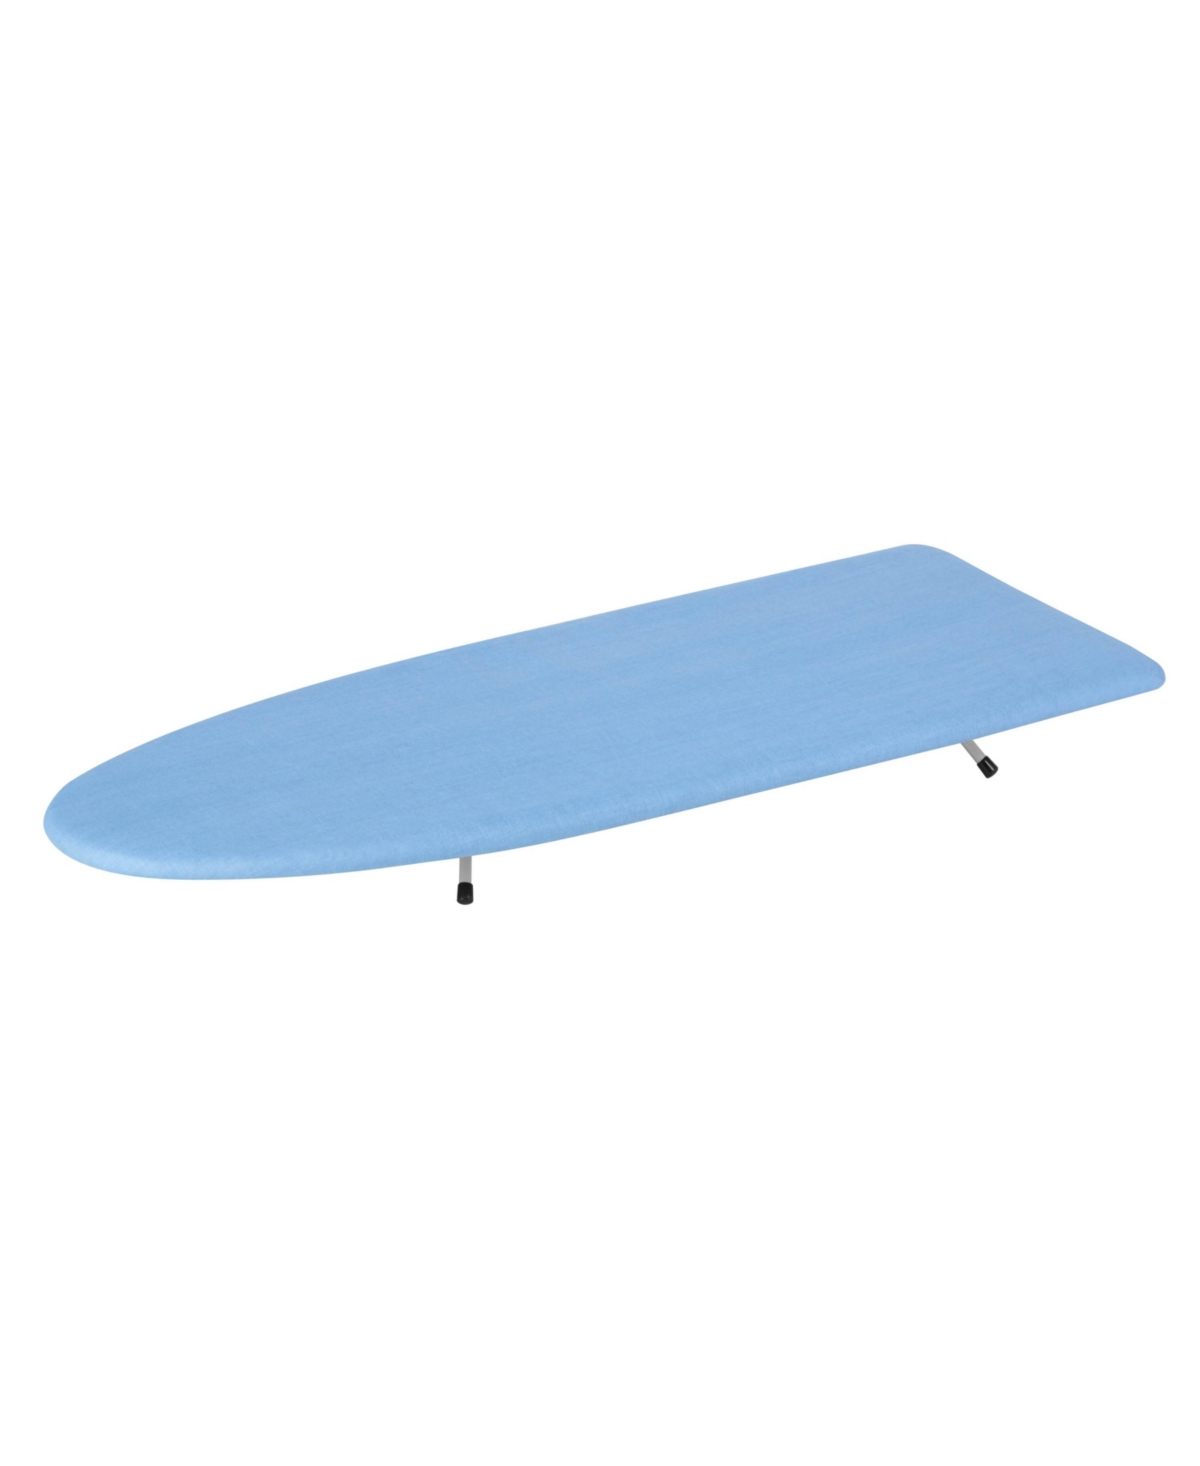 Honey Can Do Tabletop Ironing Board In Blue